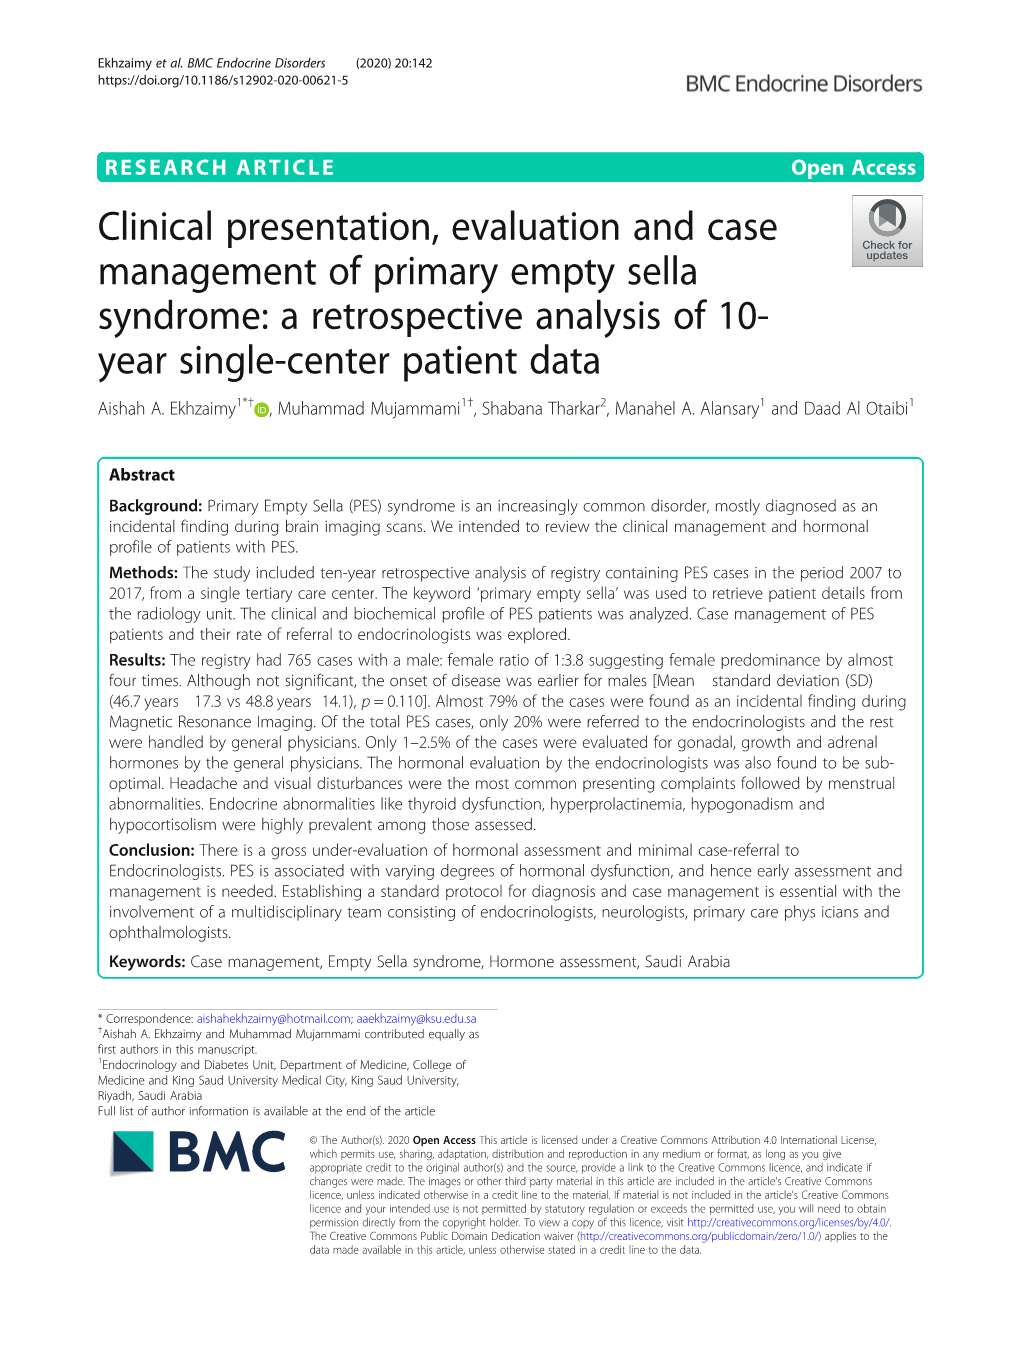 Clinical Presentation, Evaluation and Case Management of Primary Empty Sella Syndrome: a Retrospective Analysis of 10- Year Single-Center Patient Data Aishah A